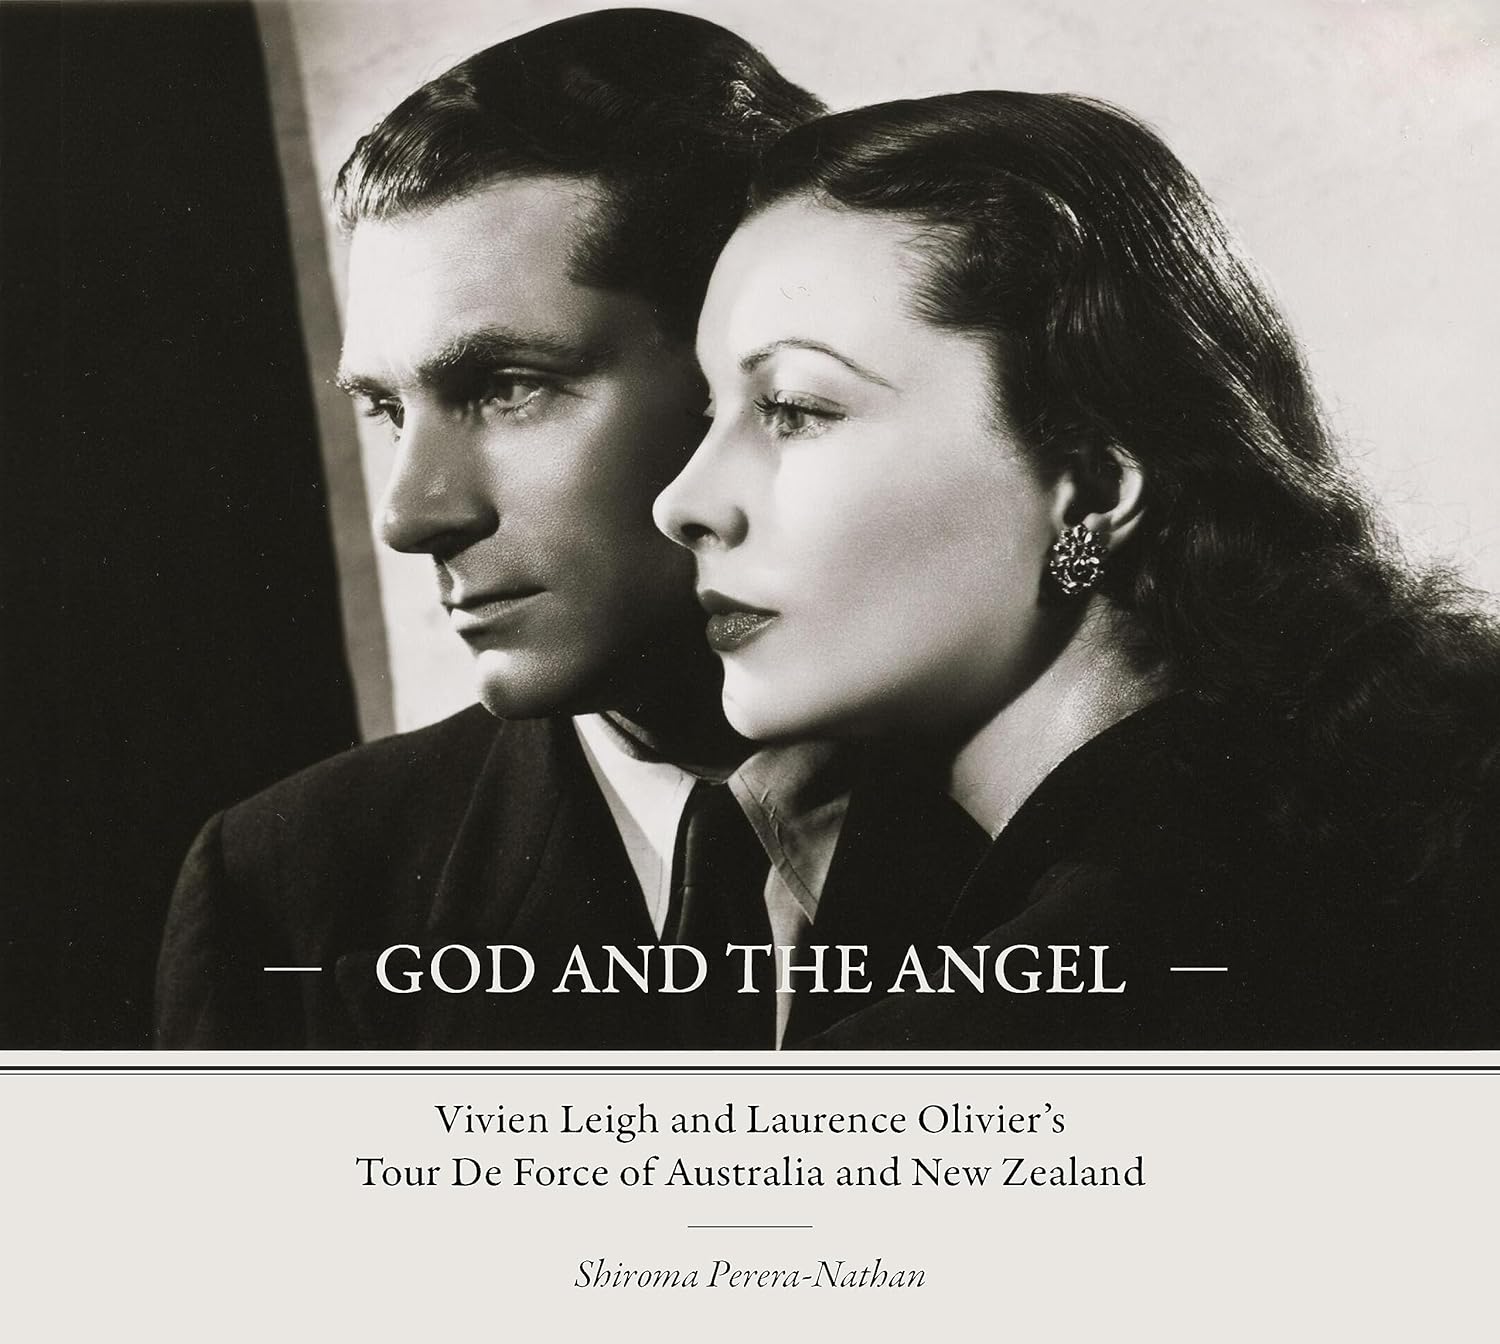 God and the Angel: Vivien Leigh and Laurence Olivier’s tour de force of Australia and New Zealand